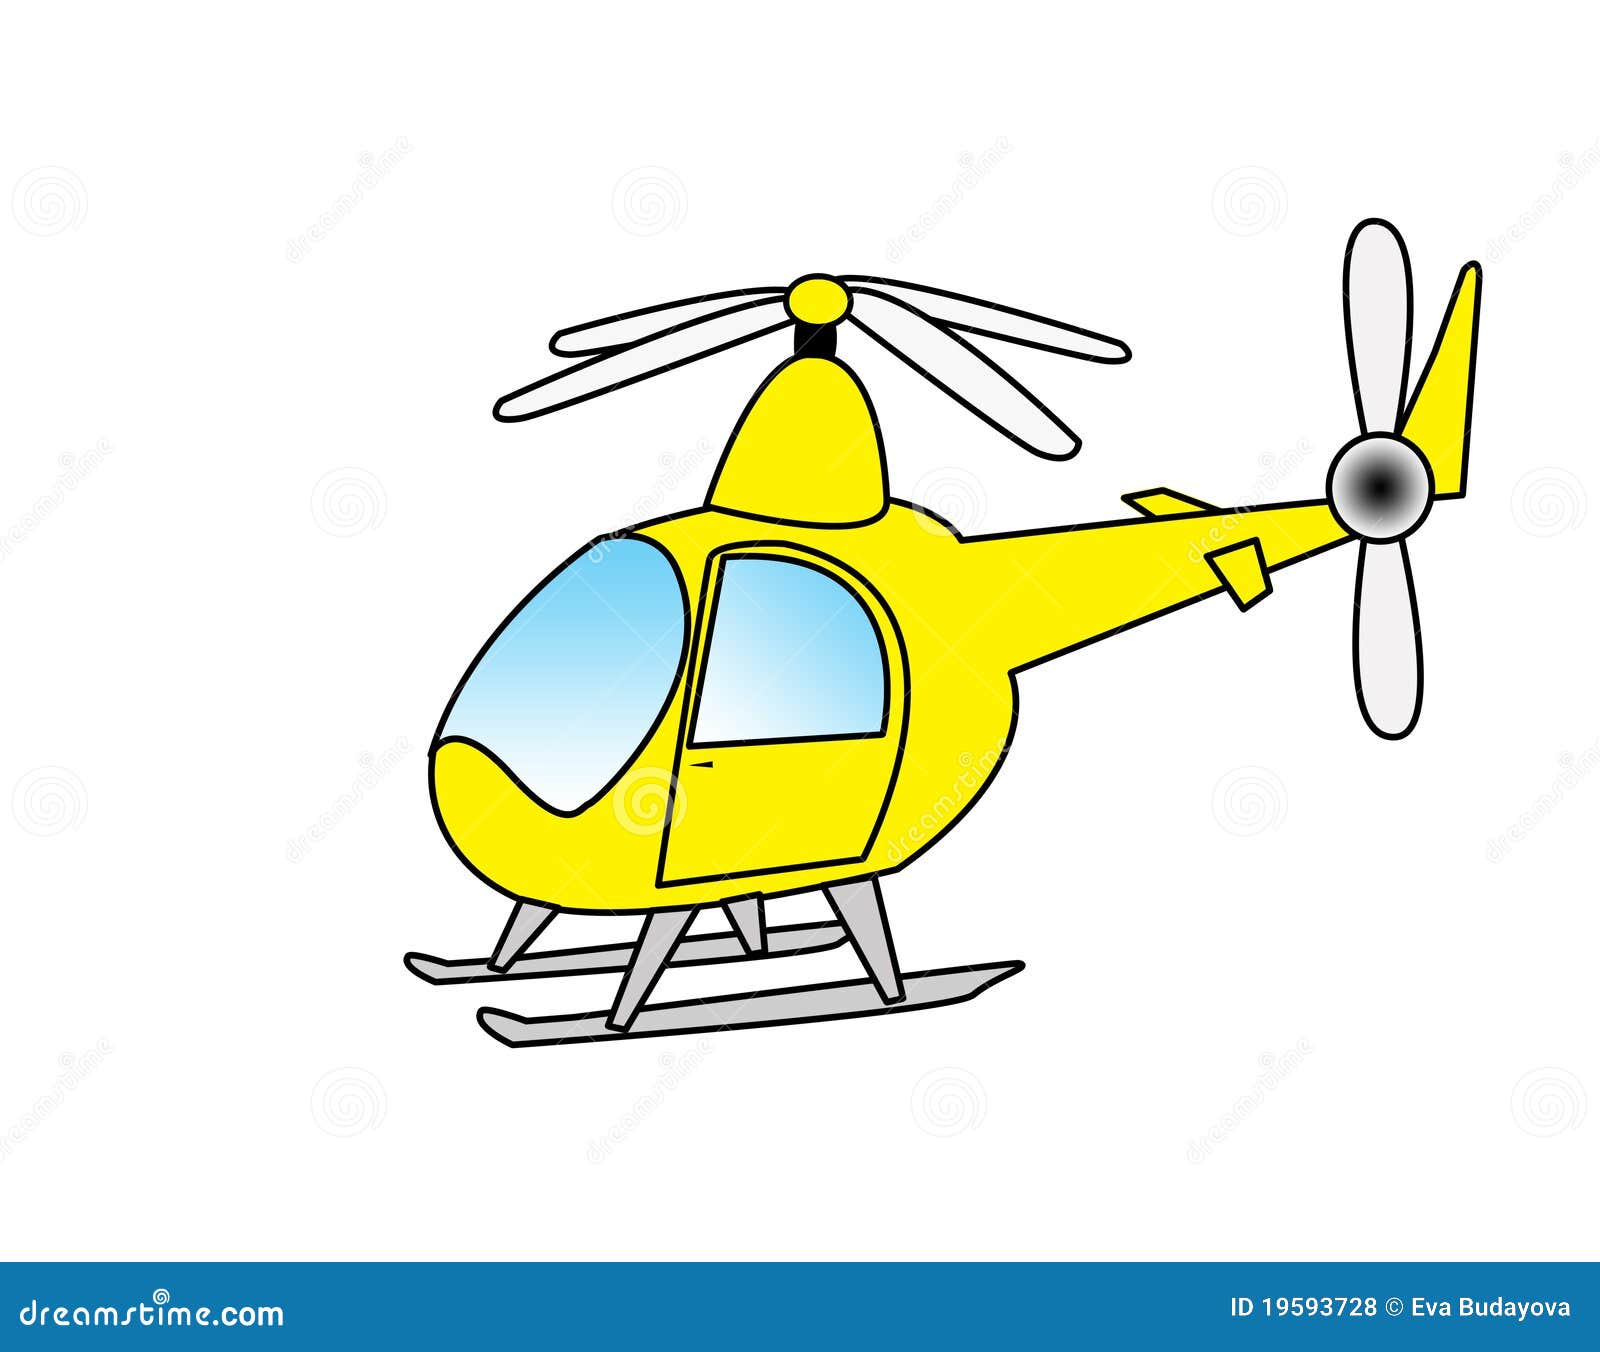 free clipart cartoon helicopter - photo #35